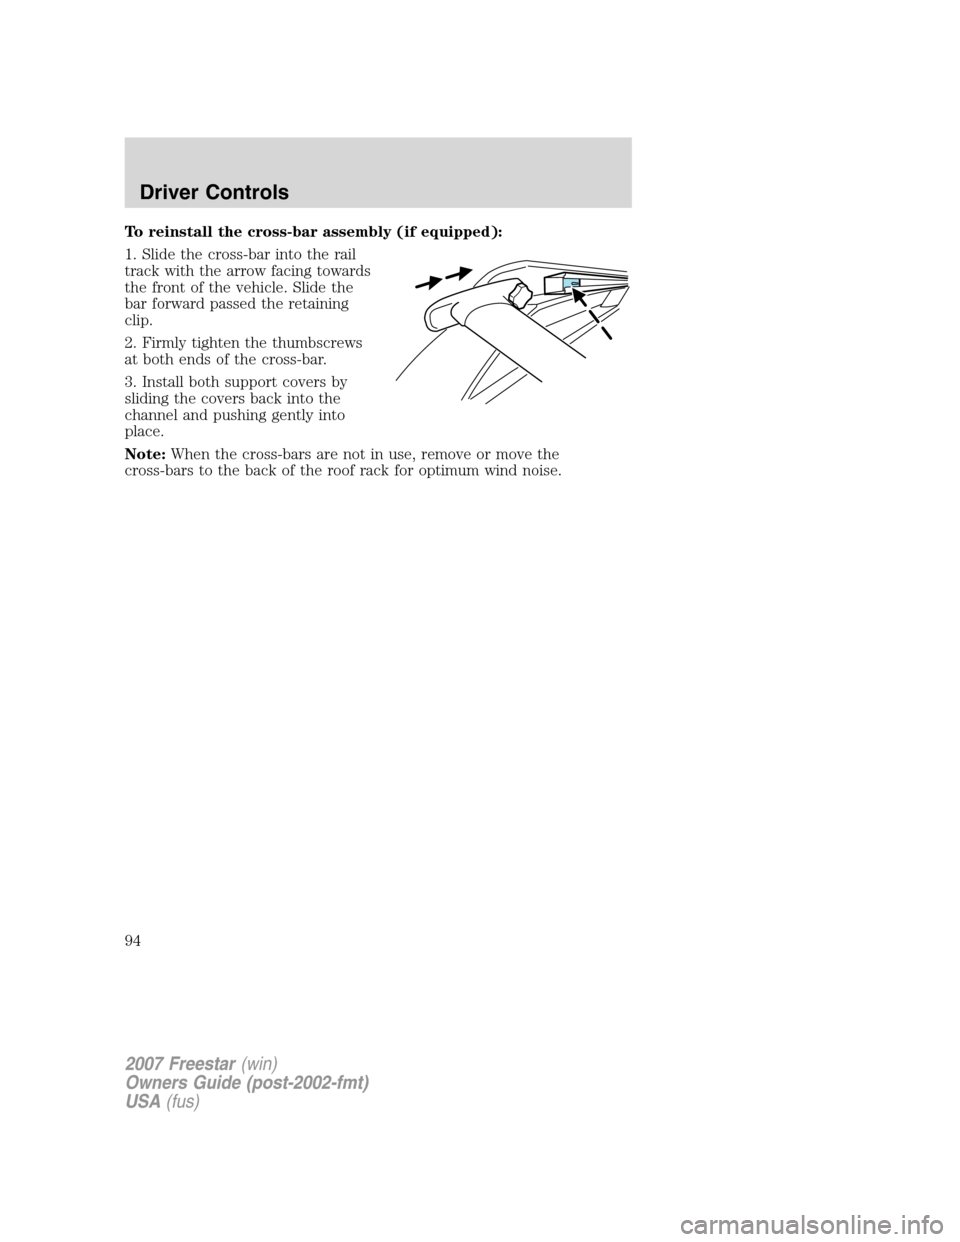 FORD FREESTAR 2007 1.G Owners Manual To reinstall the cross-bar assembly (if equipped):
1. Slide the cross-bar into the rail
track with the arrow facing towards
the front of the vehicle. Slide the
bar forward passed the retaining
clip.
2